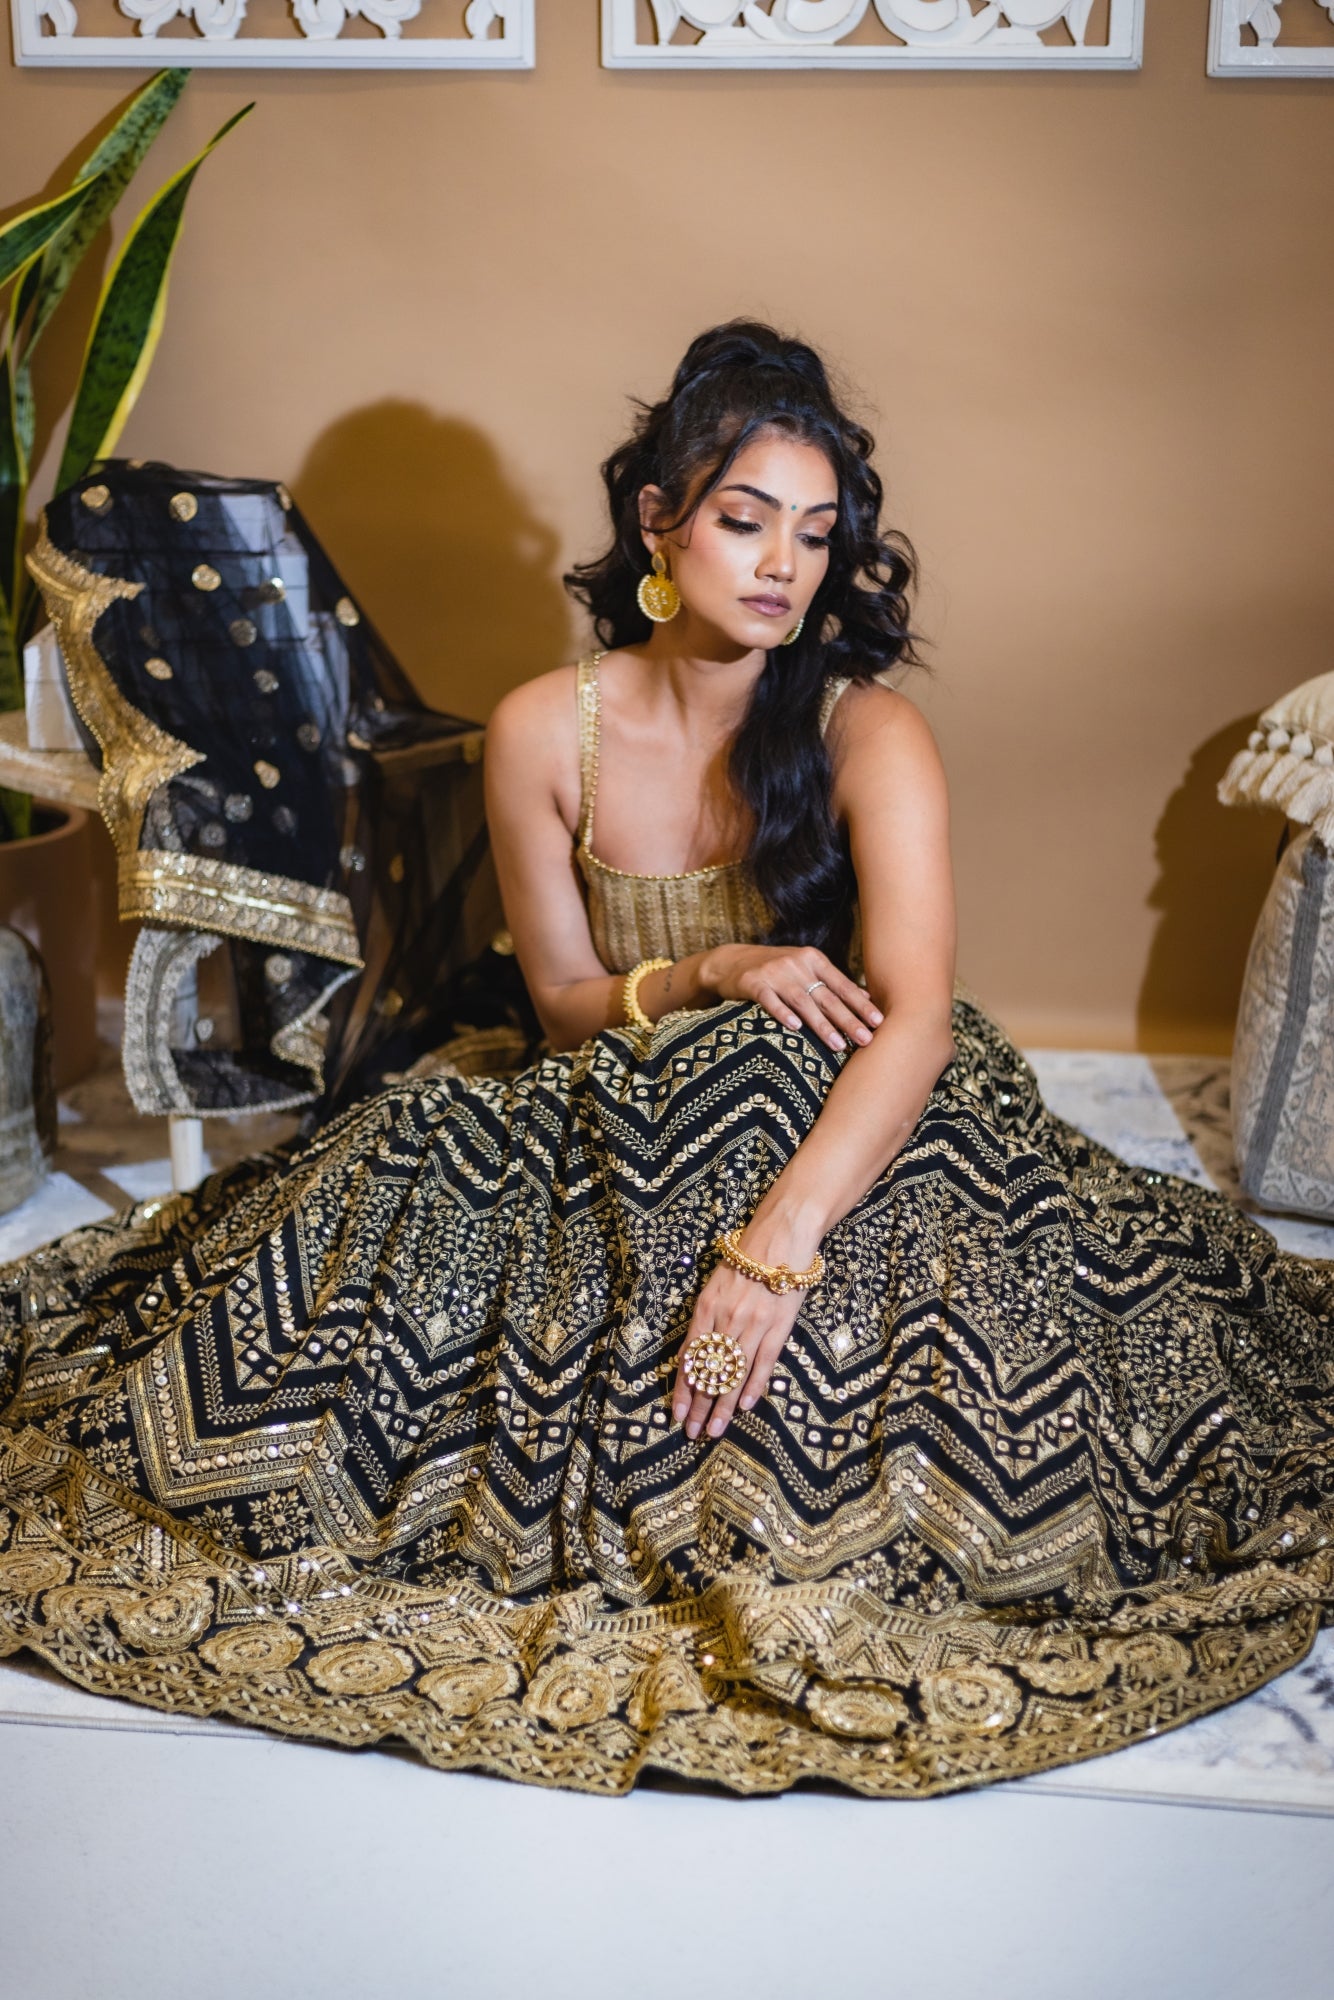 Looking for authentic Lehenga then buy Black AND GOLDEN Lehenga Choli Set  Online in India. It is a set of… | Stylish dresses, Black and gold lehenga,  Indian fashion